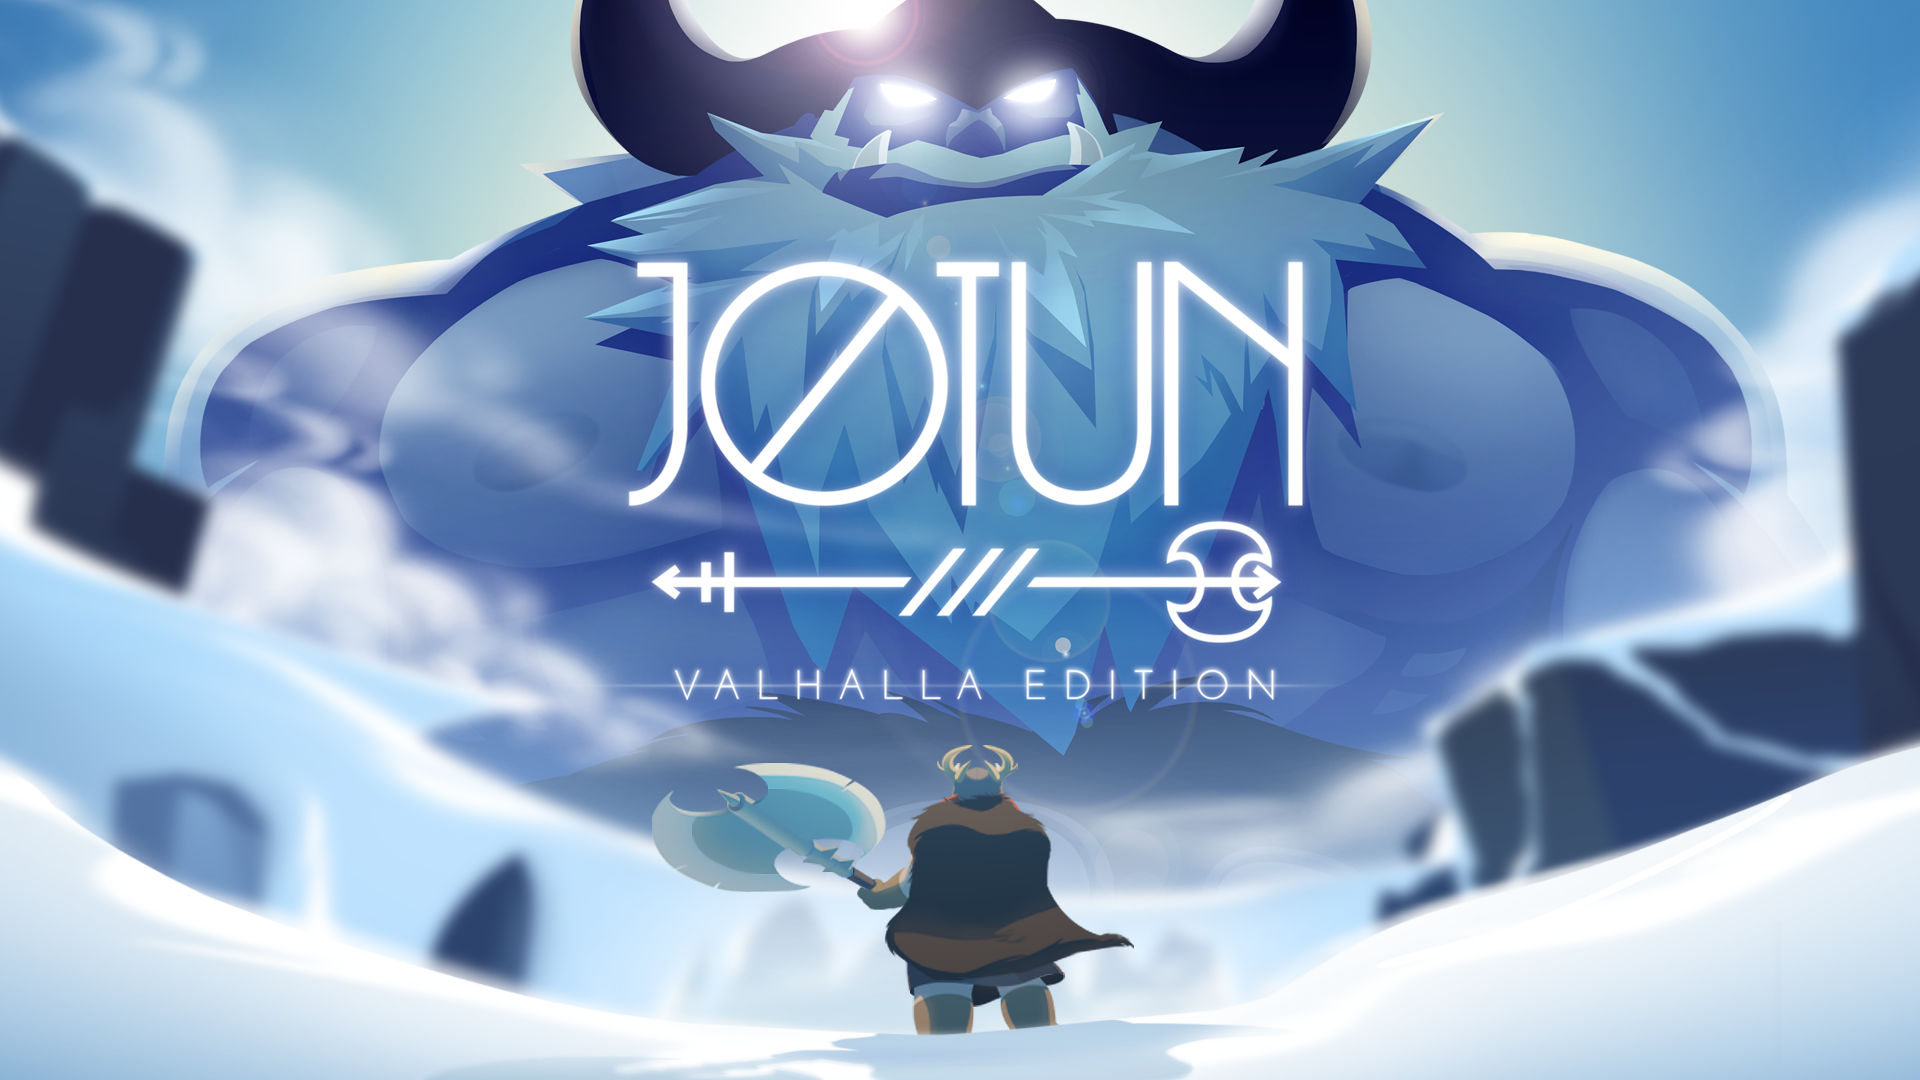 Jotun Valhalla Edition Announced For Nintendo Switch Informed Pixel